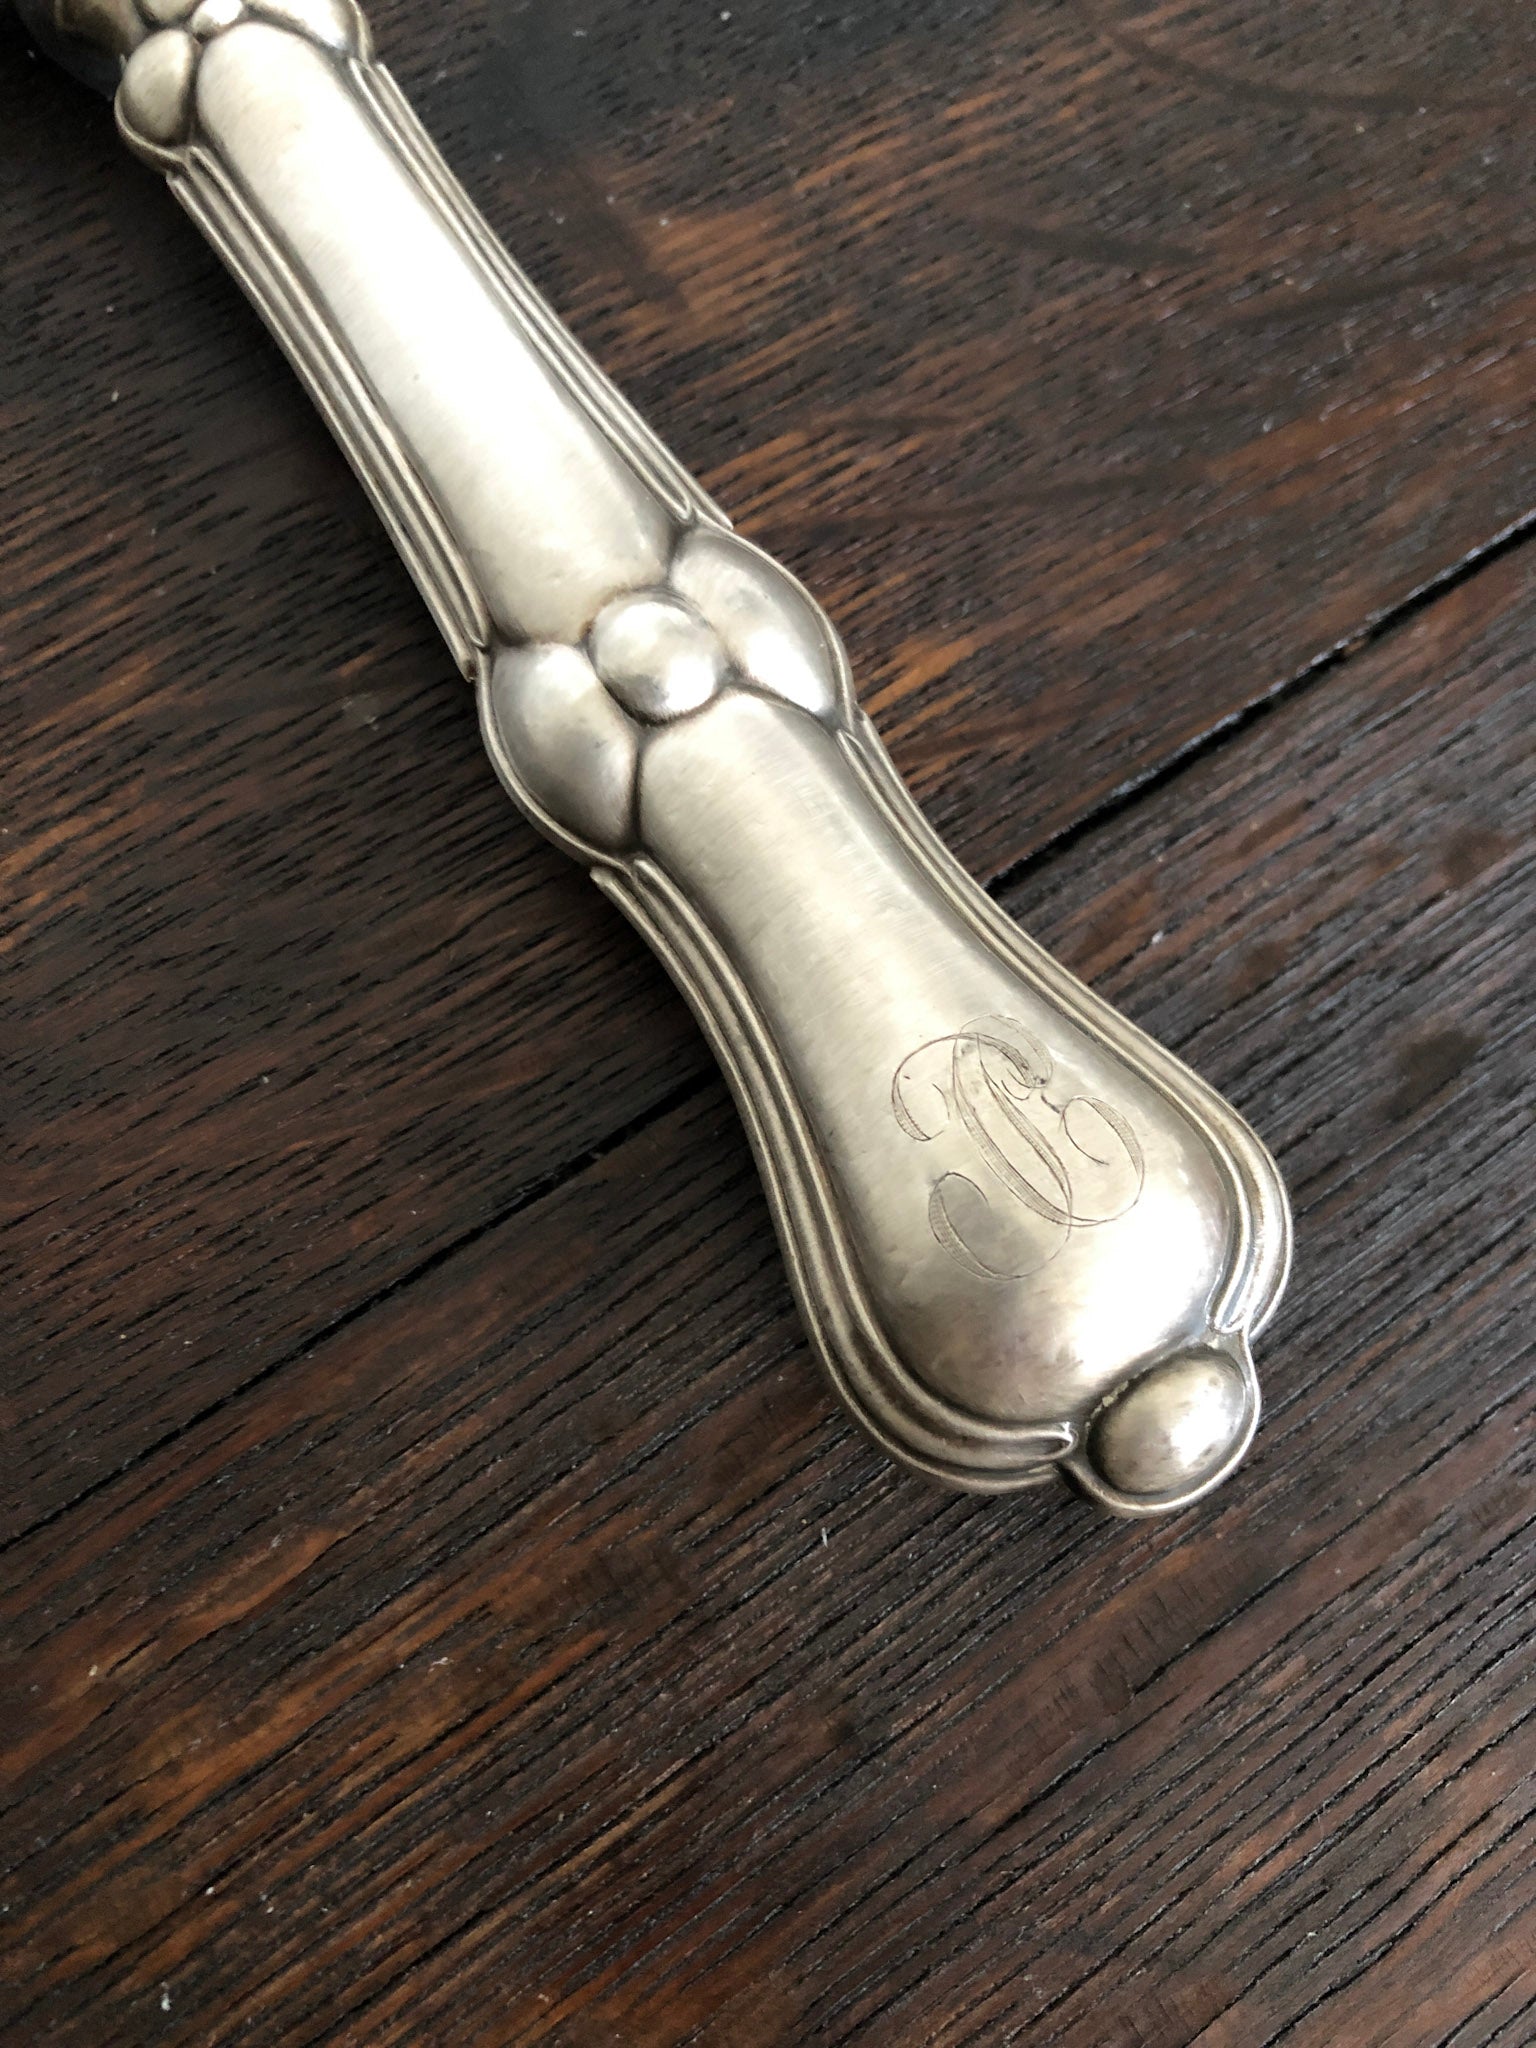 Antique French Carving Knife